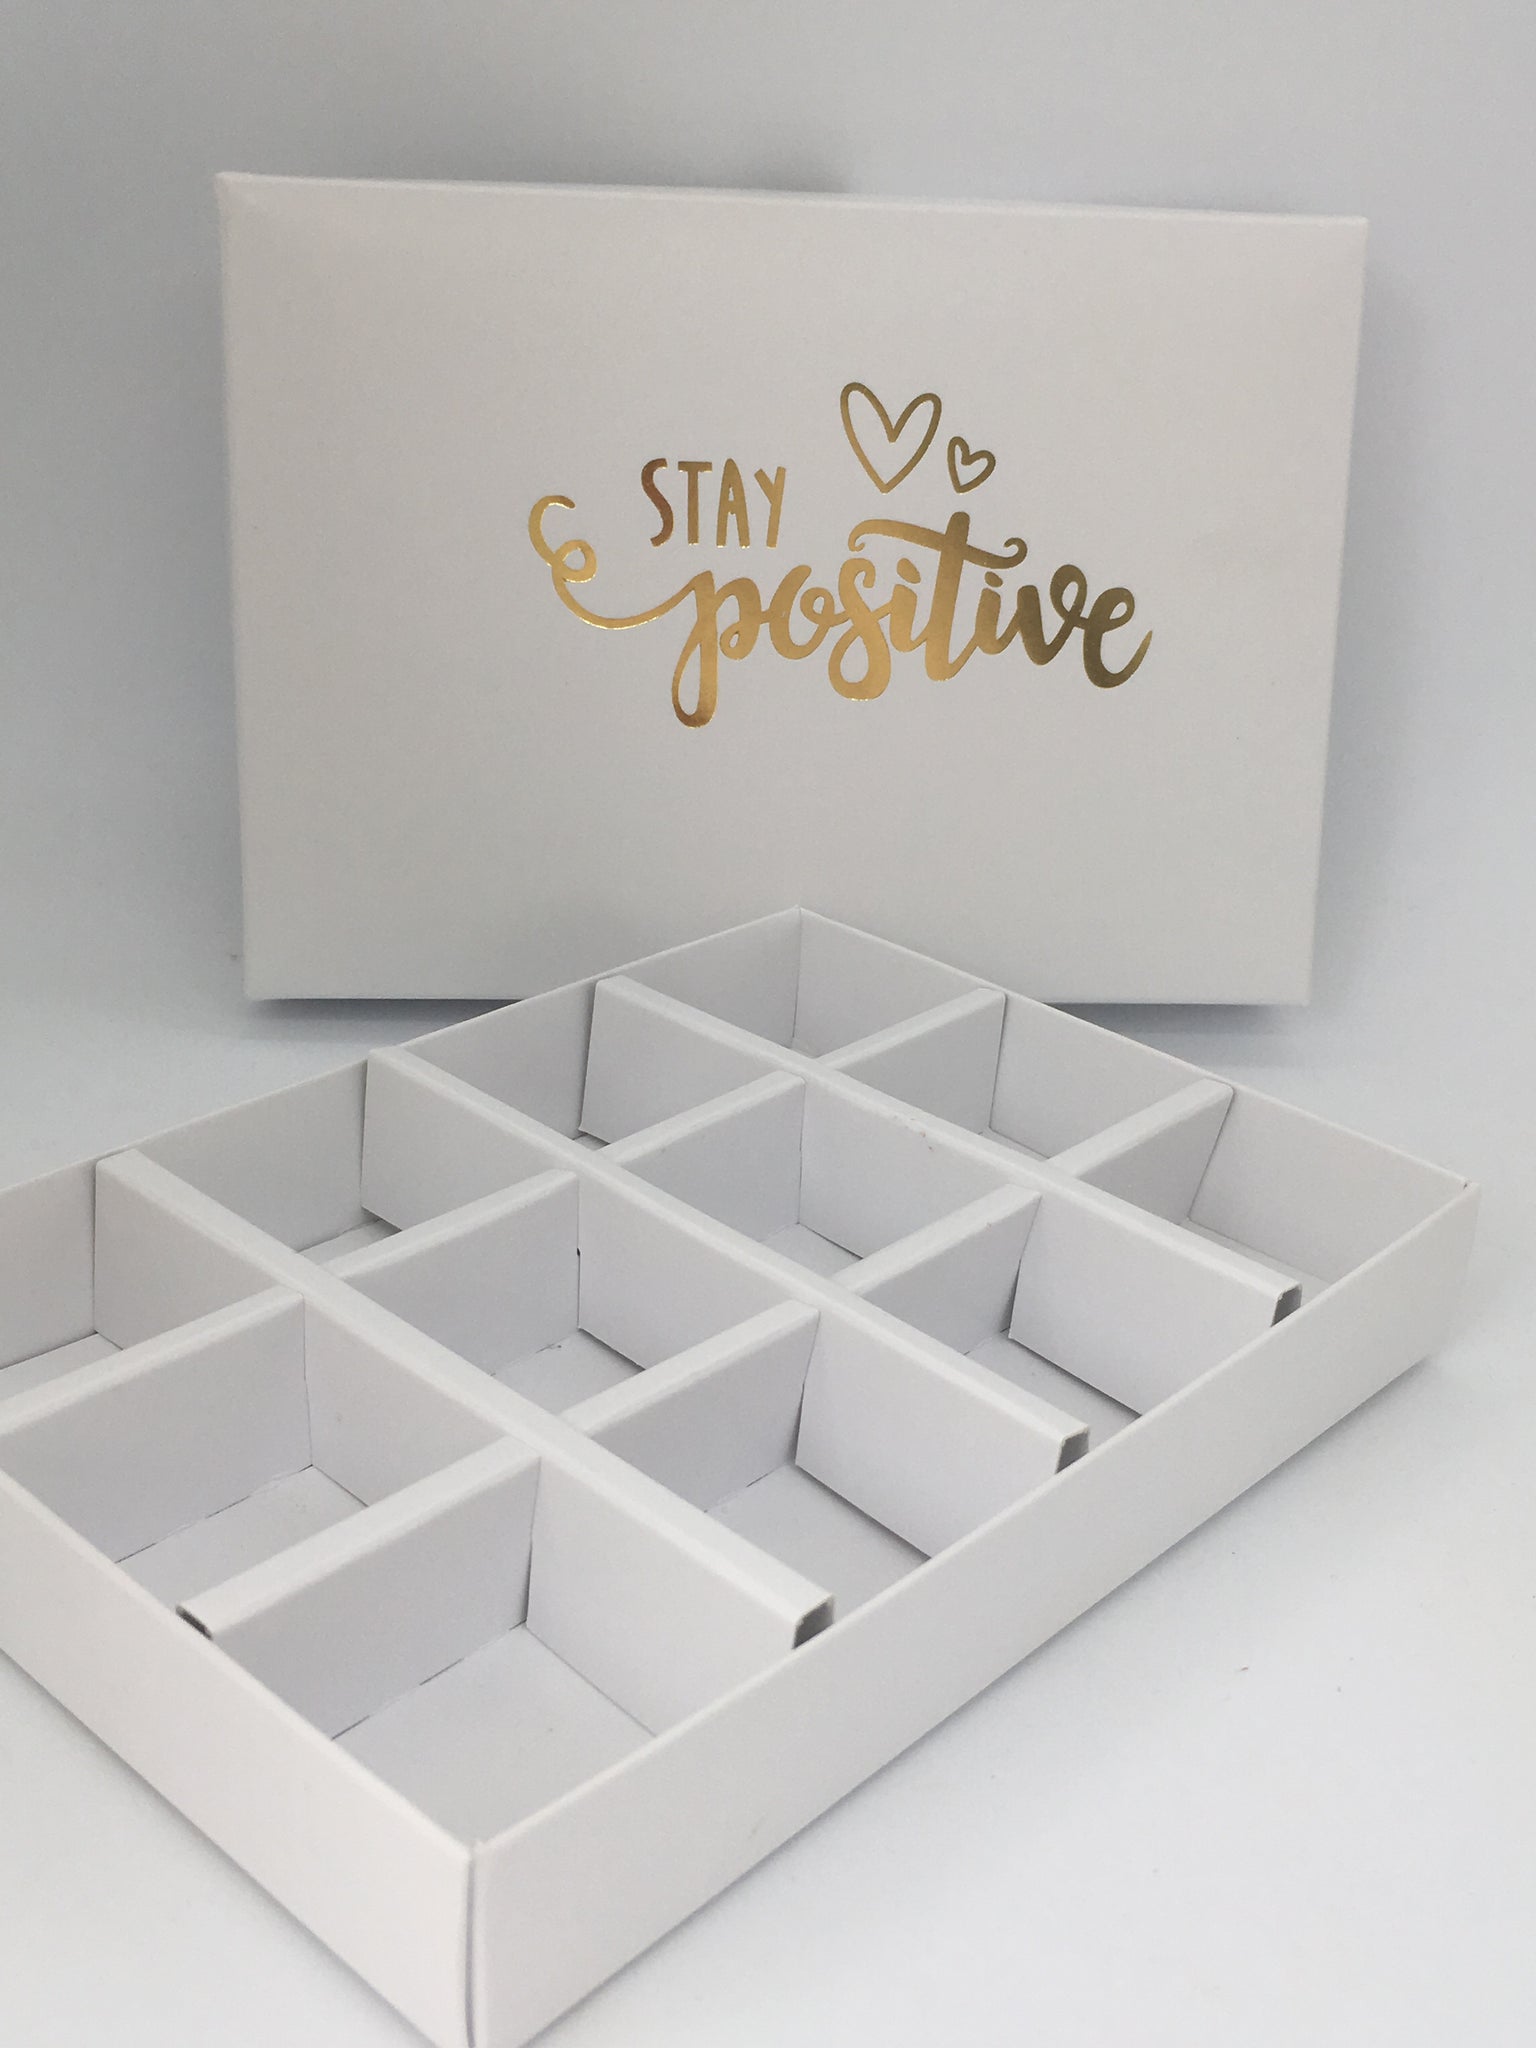 SOLID LID 12 CAVITY STAY POSITIVE BOX BLANK 168 X 115 X 26mm